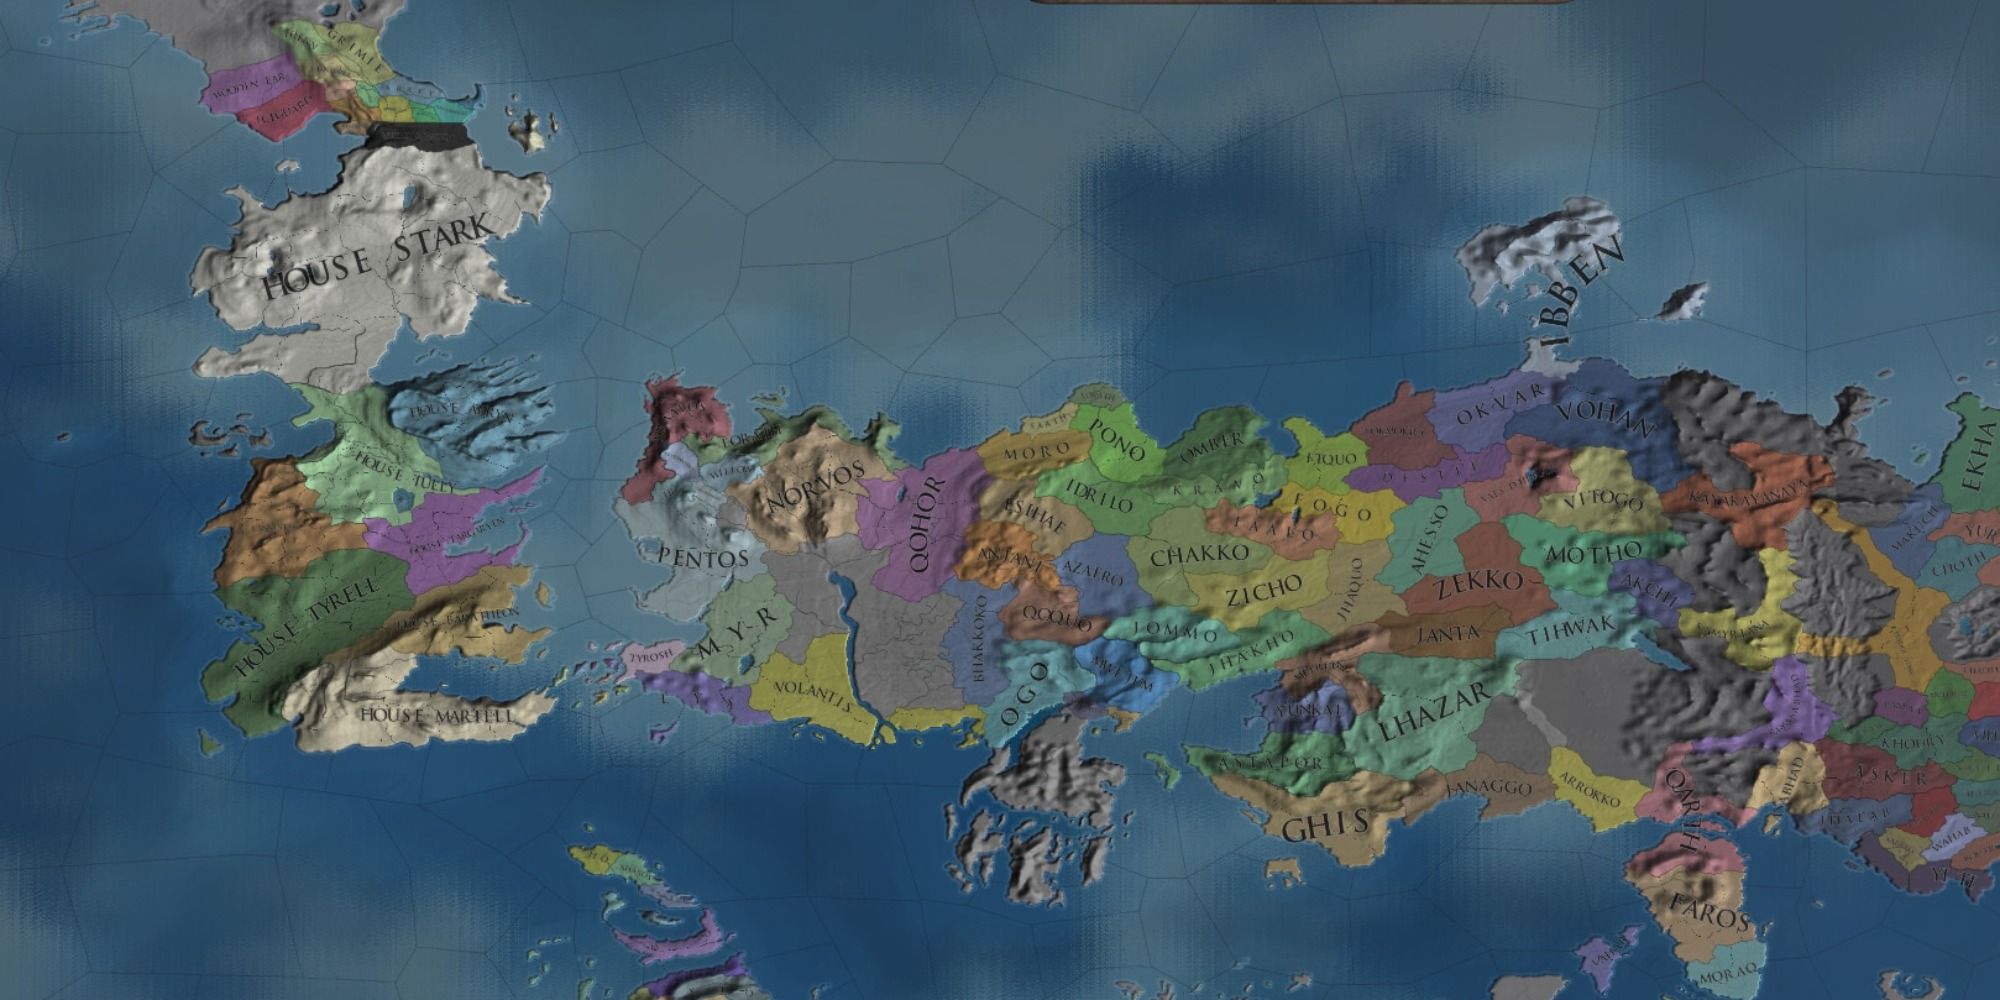 europa universalis 4 extended timeline mod personal unions